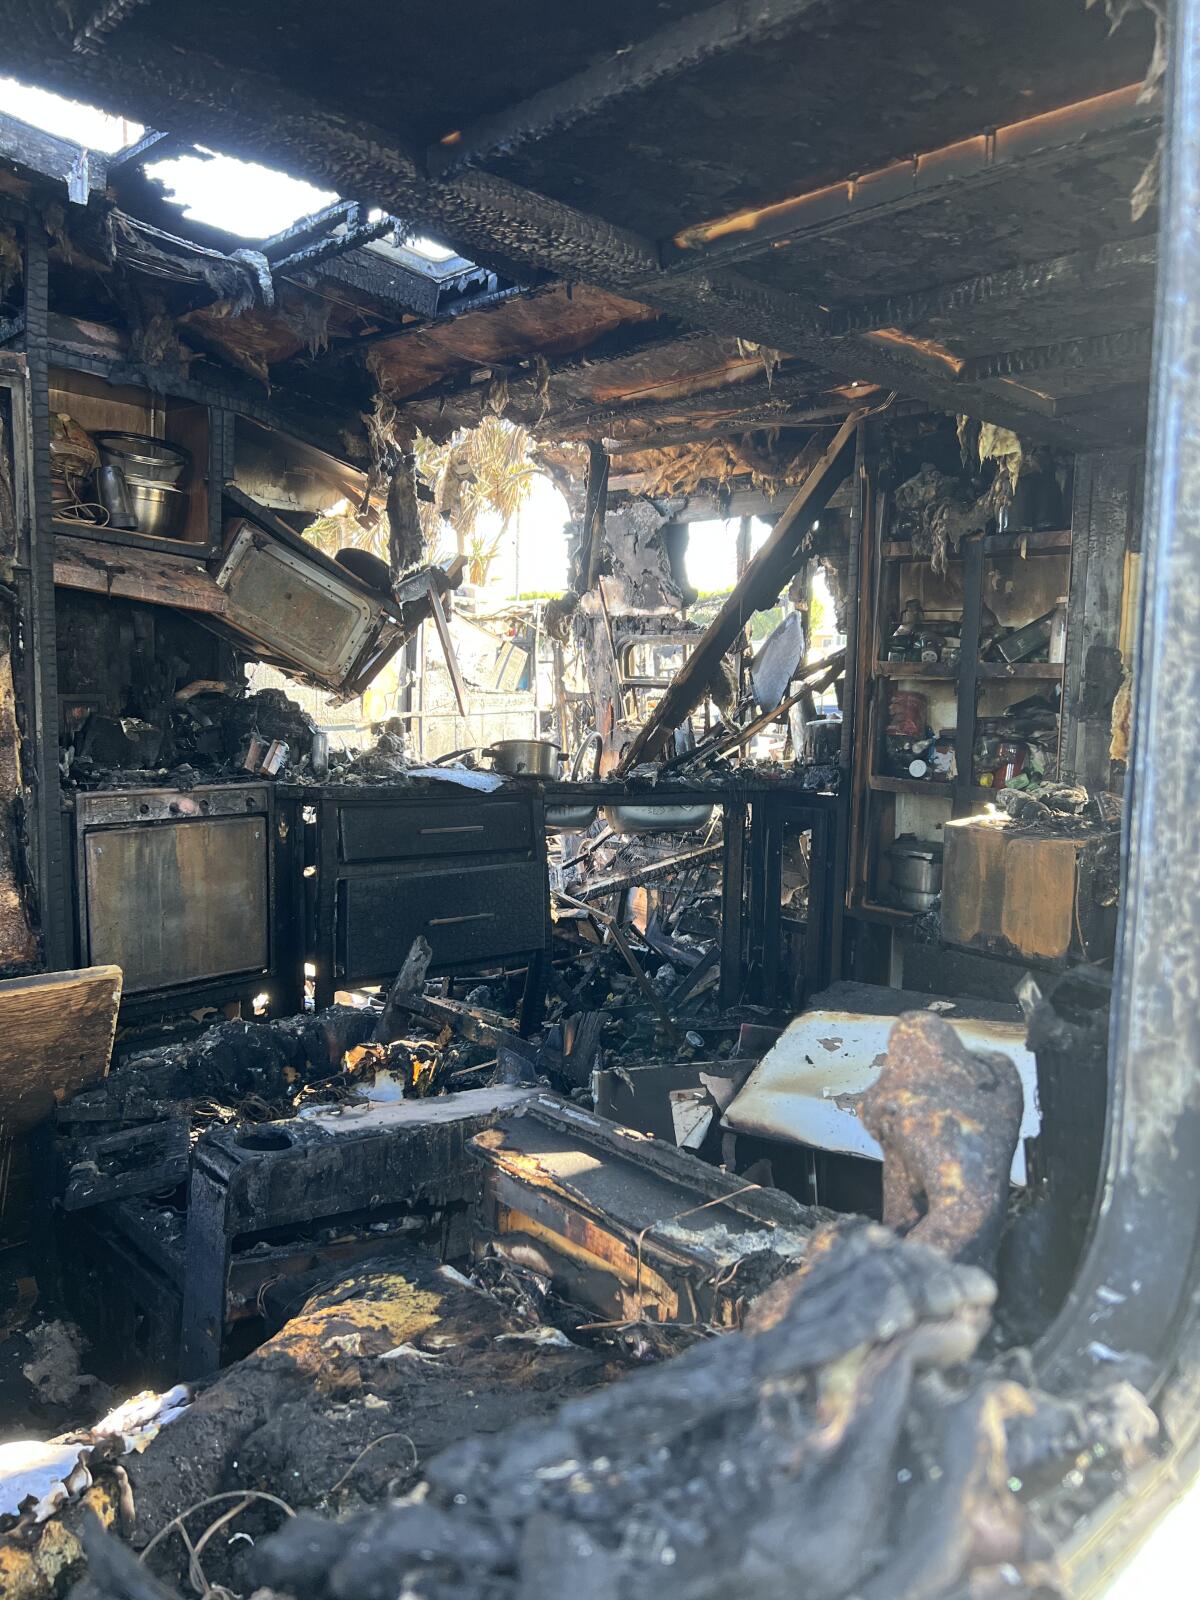 A photo from the interior of Martin's trailer after the fire.